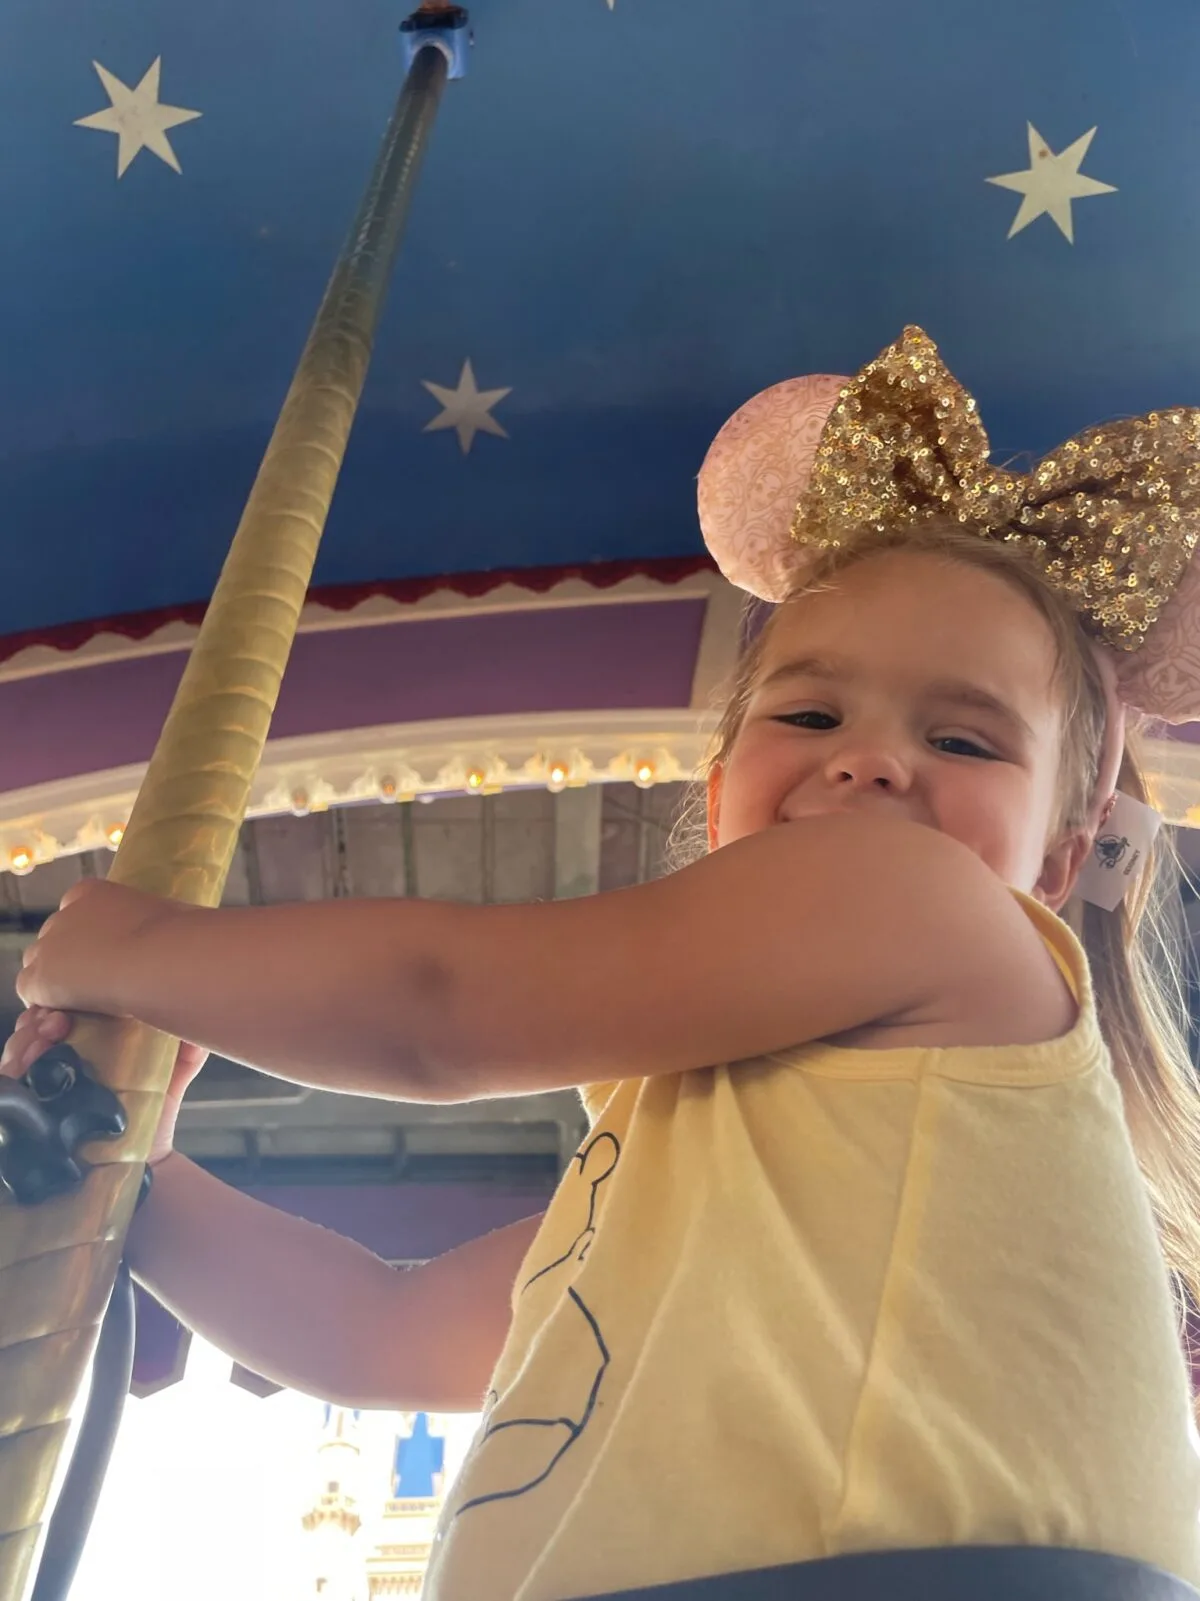 Young girl smiling on a merry-go-round